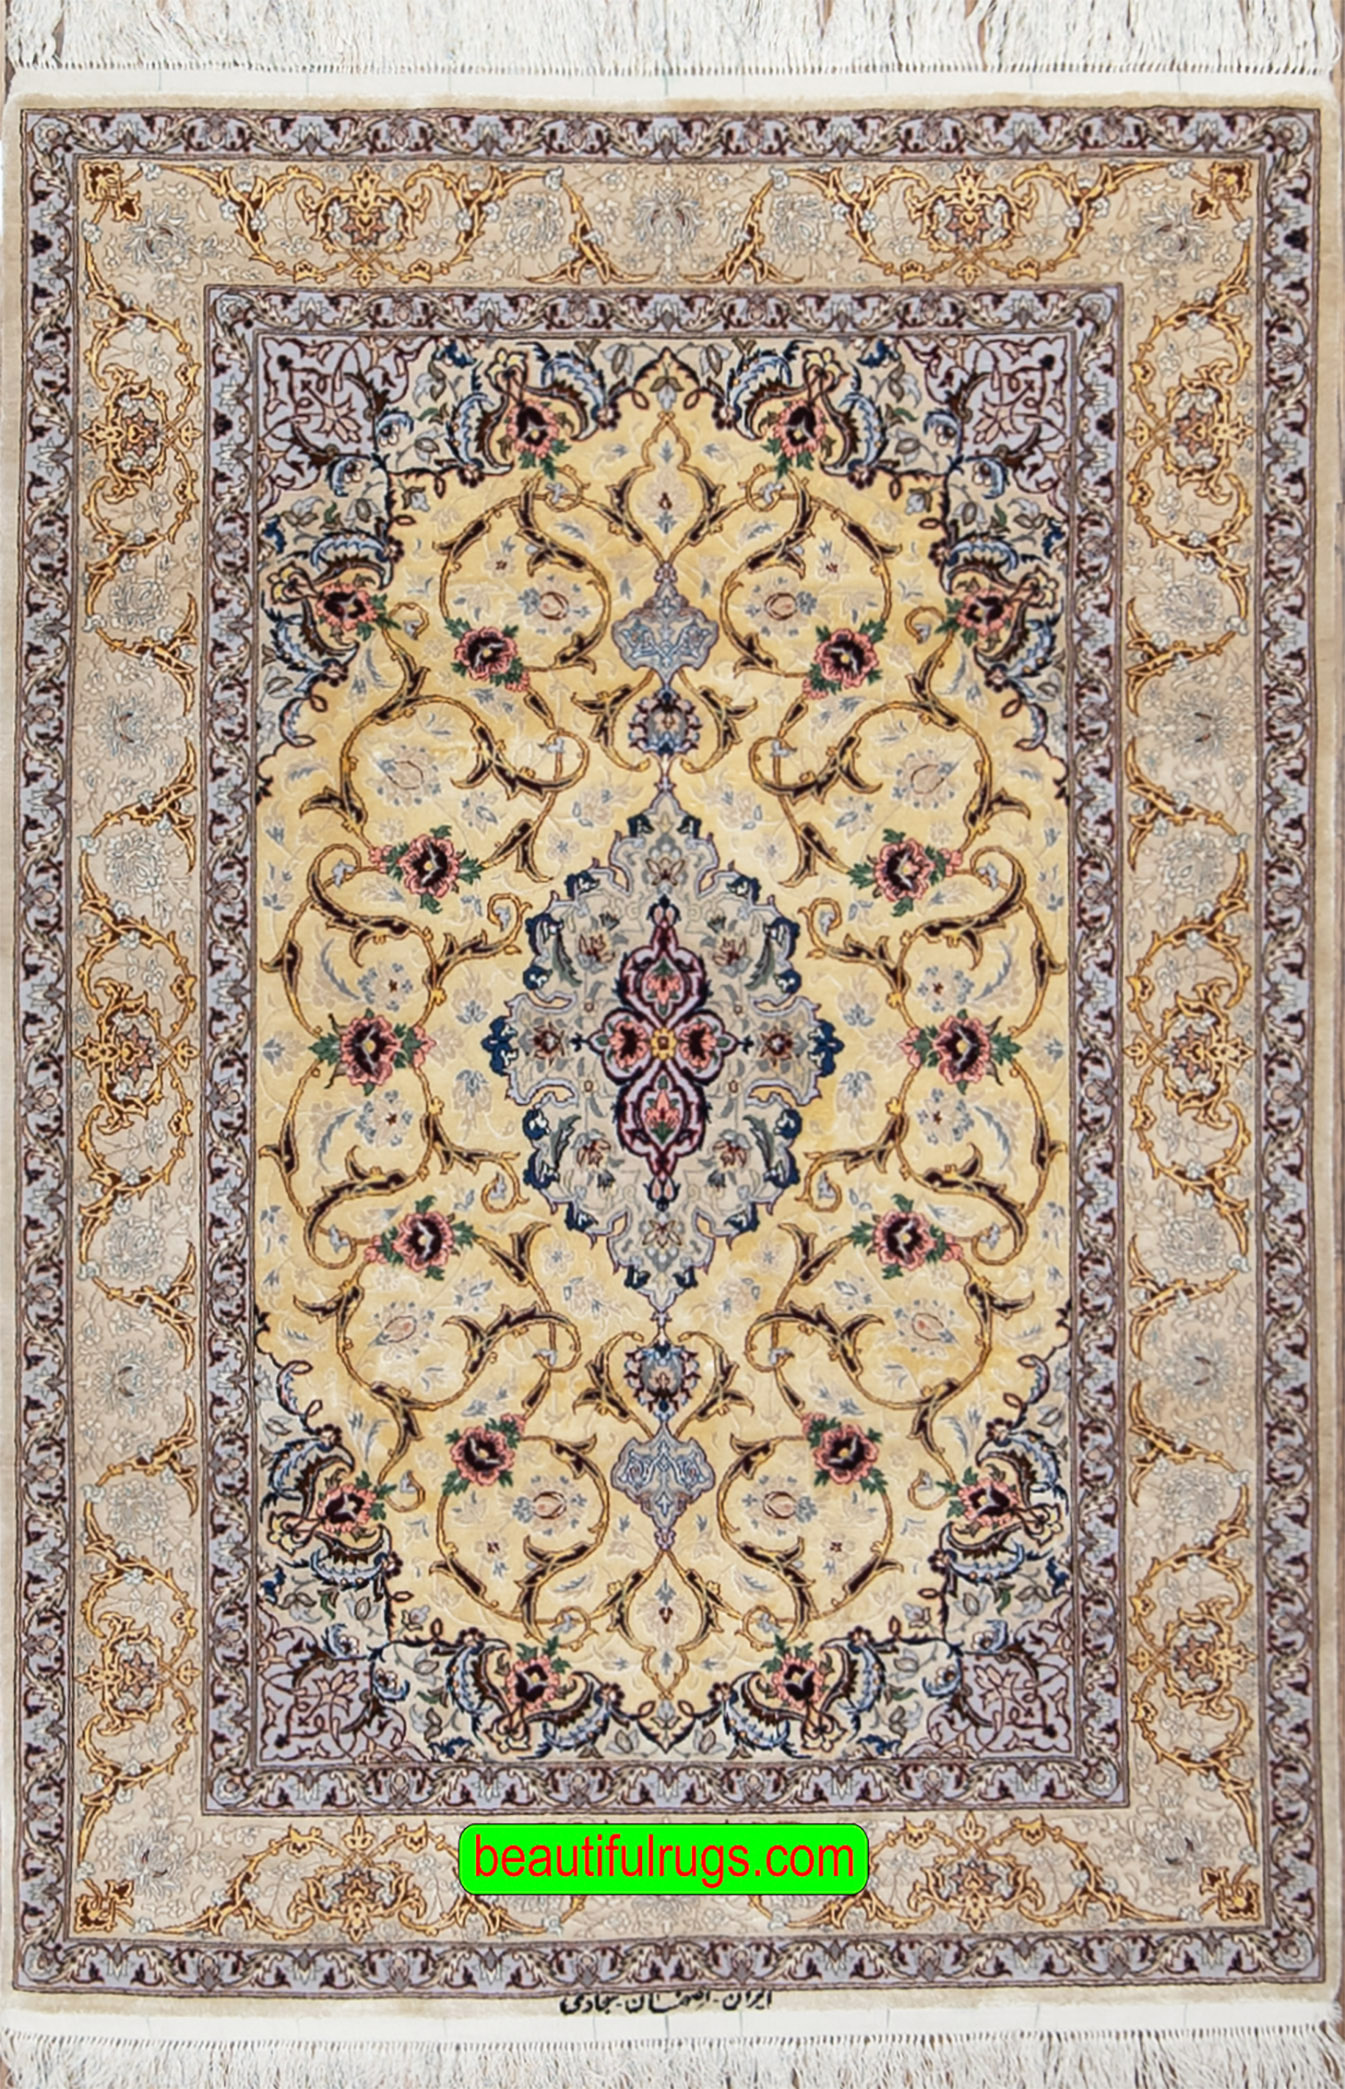 Persian Isfahan silk rug in gold color. Size 3.8x5.3.